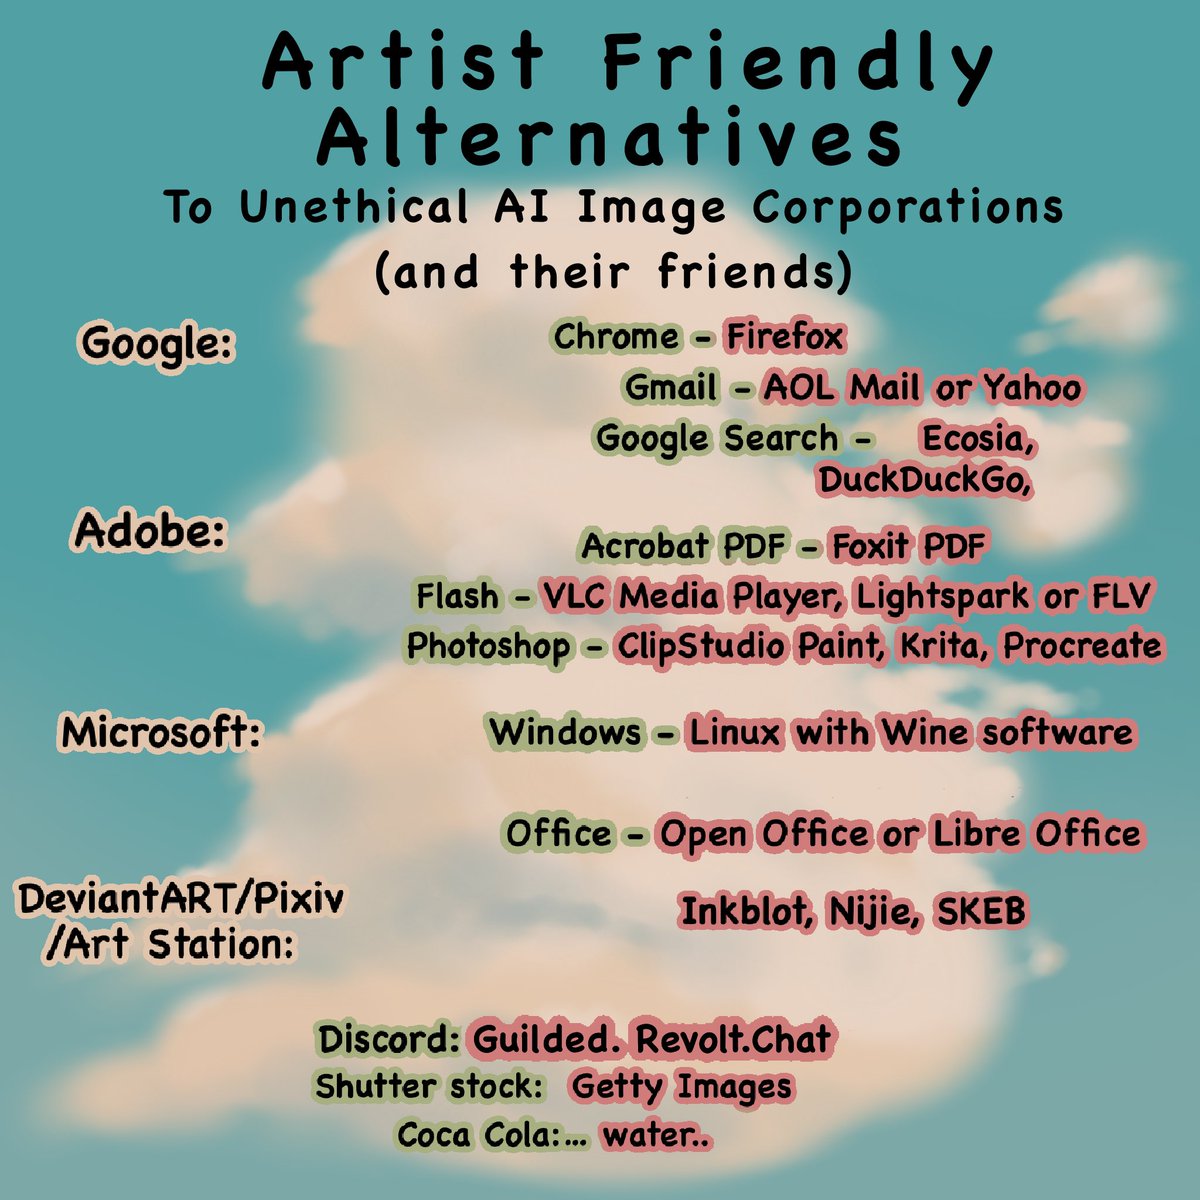 ARITSTS (Update 3). A list of those I believe to support AI image generators and their practices. I won’t be supporting any of these businesses. I have also attached a list of artist friendly alternatives you might wish to use instead.  #teamhuman #createdontscrape 🧵>